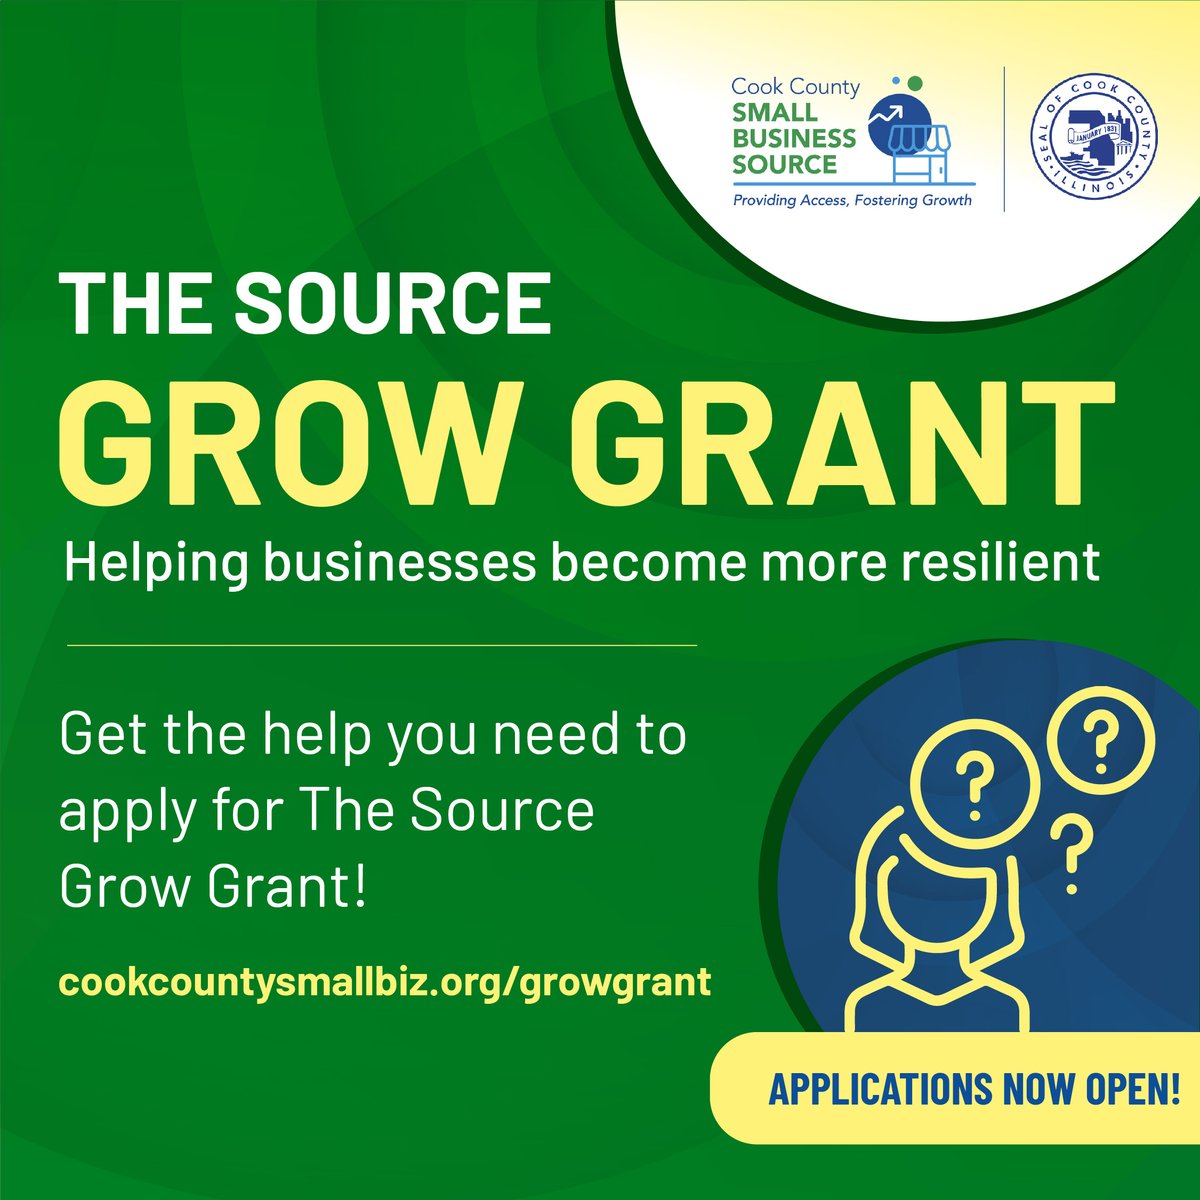 Are you a small business in #CookCounty that's been impacted by the pandemic? The Small Business Source Grow Grant provides $10,000 grants to foster recovery and resiliency, helping small businesses thrive. Learn more at cookcountysmallbiz.org/growgrant Applications close 10/31